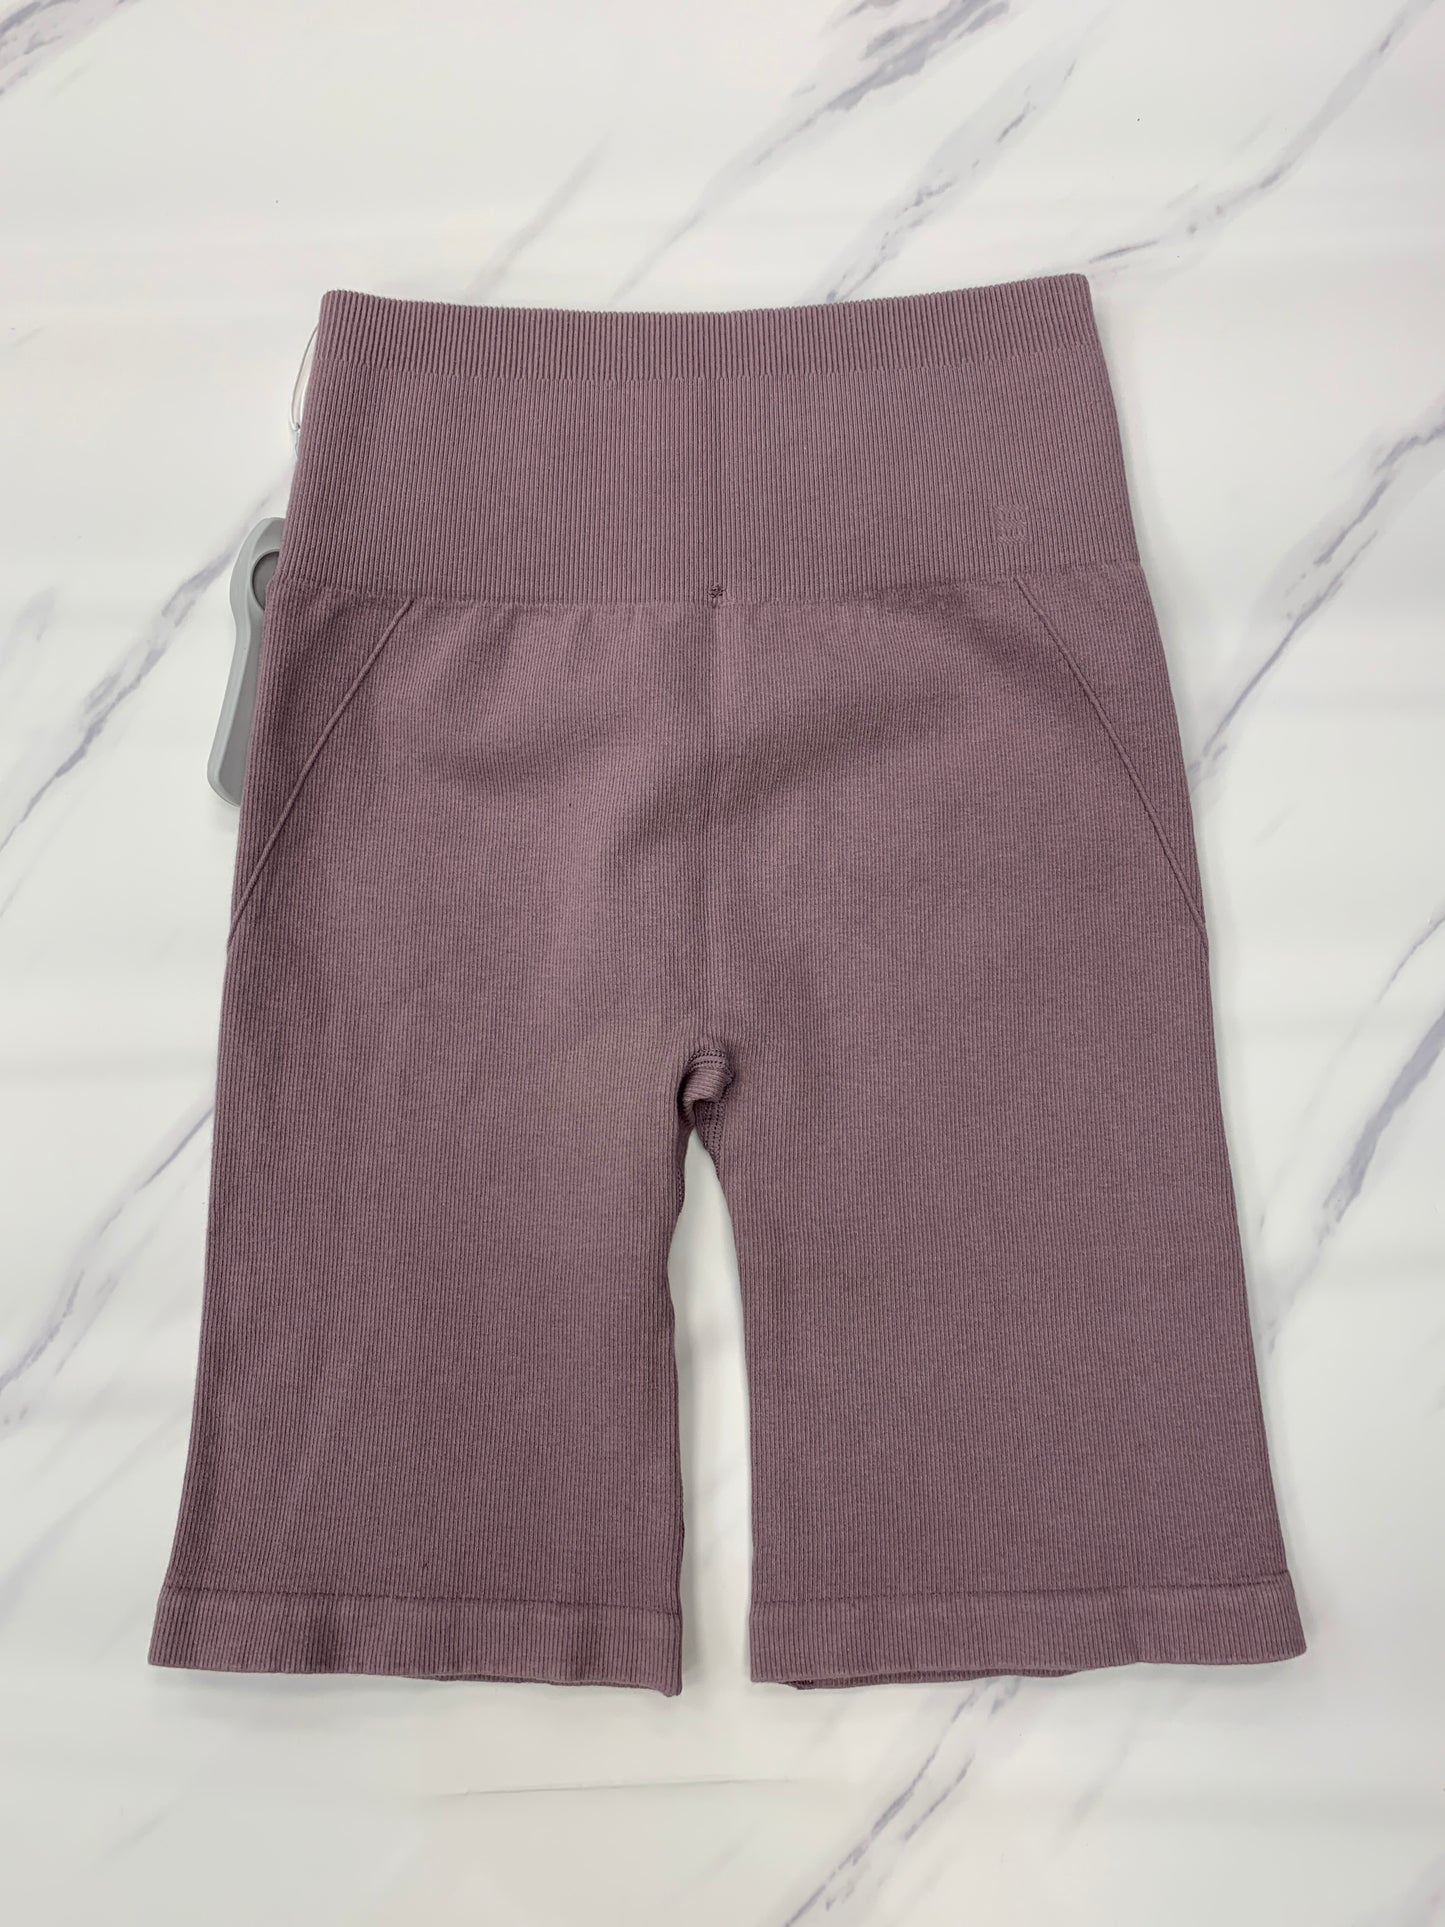 Athletic Shorts By Everlane  Size: S